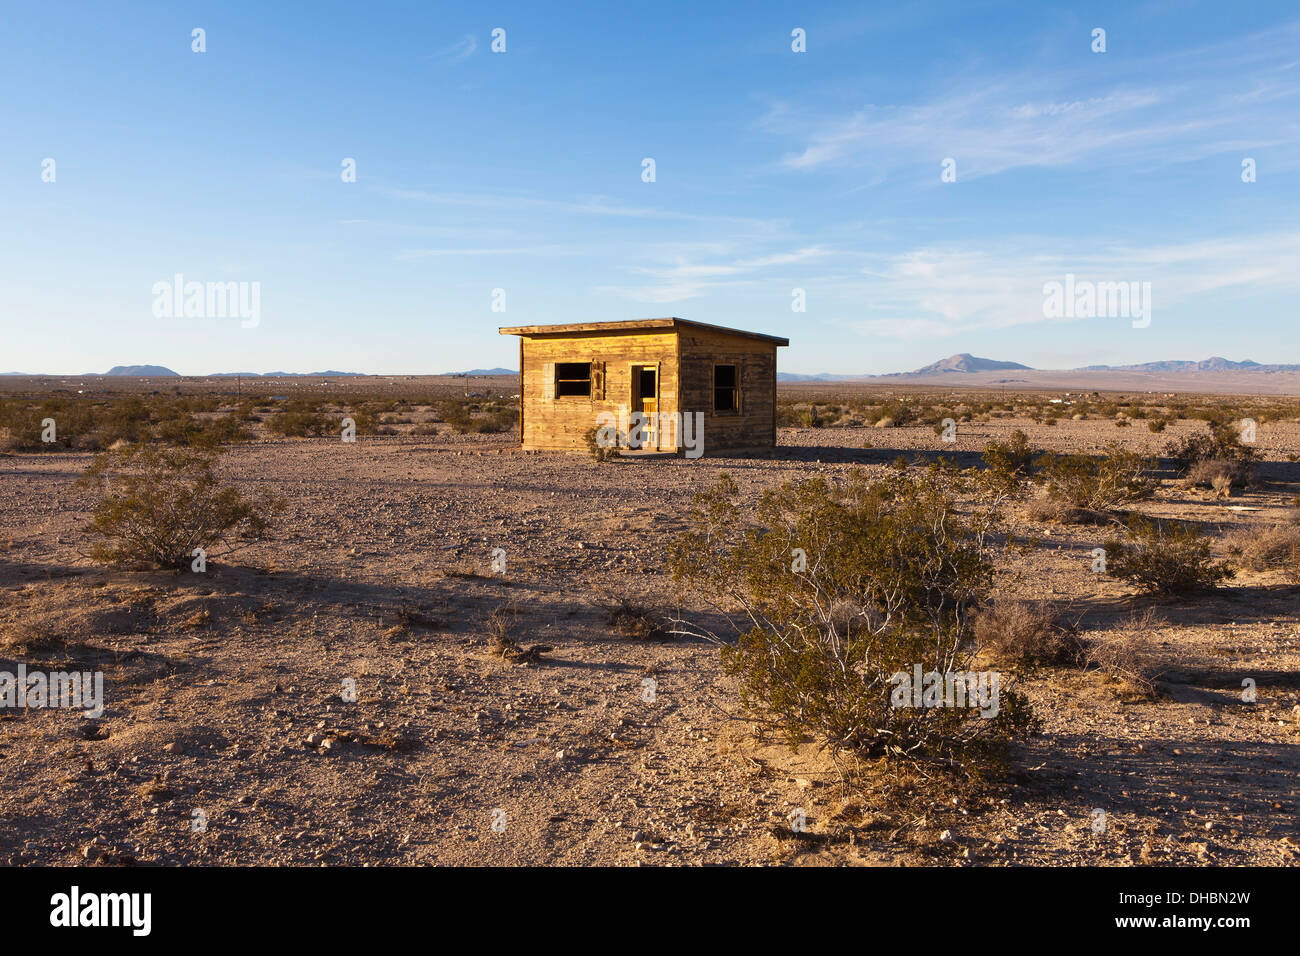 A small abandoned building in the Mojave desert landscape. Stock Photo